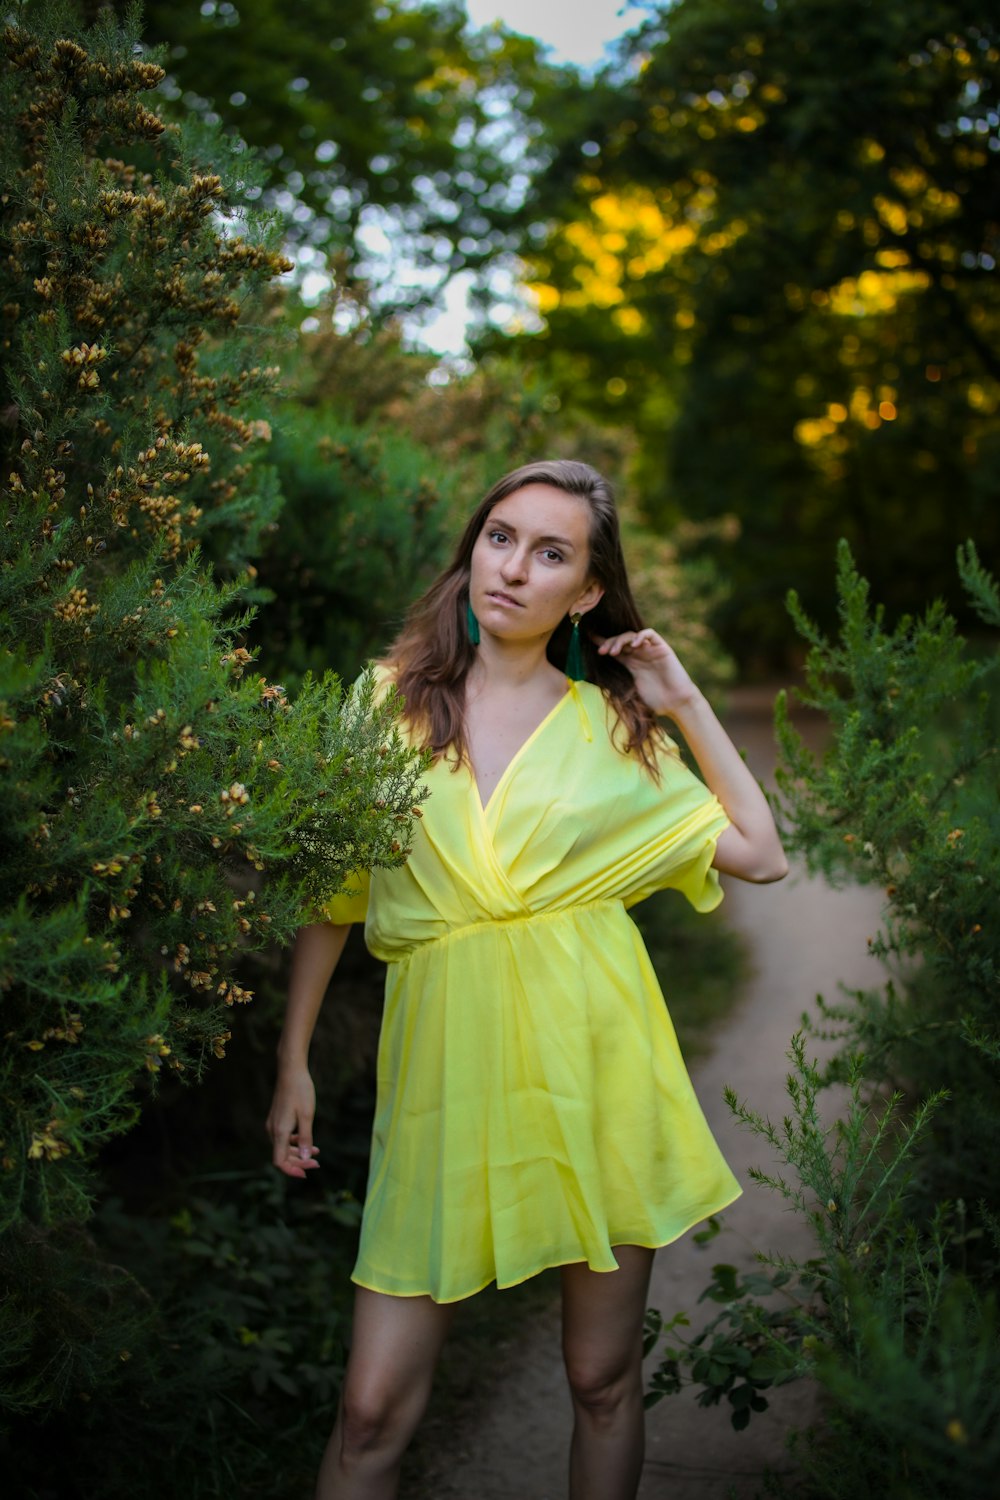 woman in yellow sleeveless dress standing beside green plant during daytime